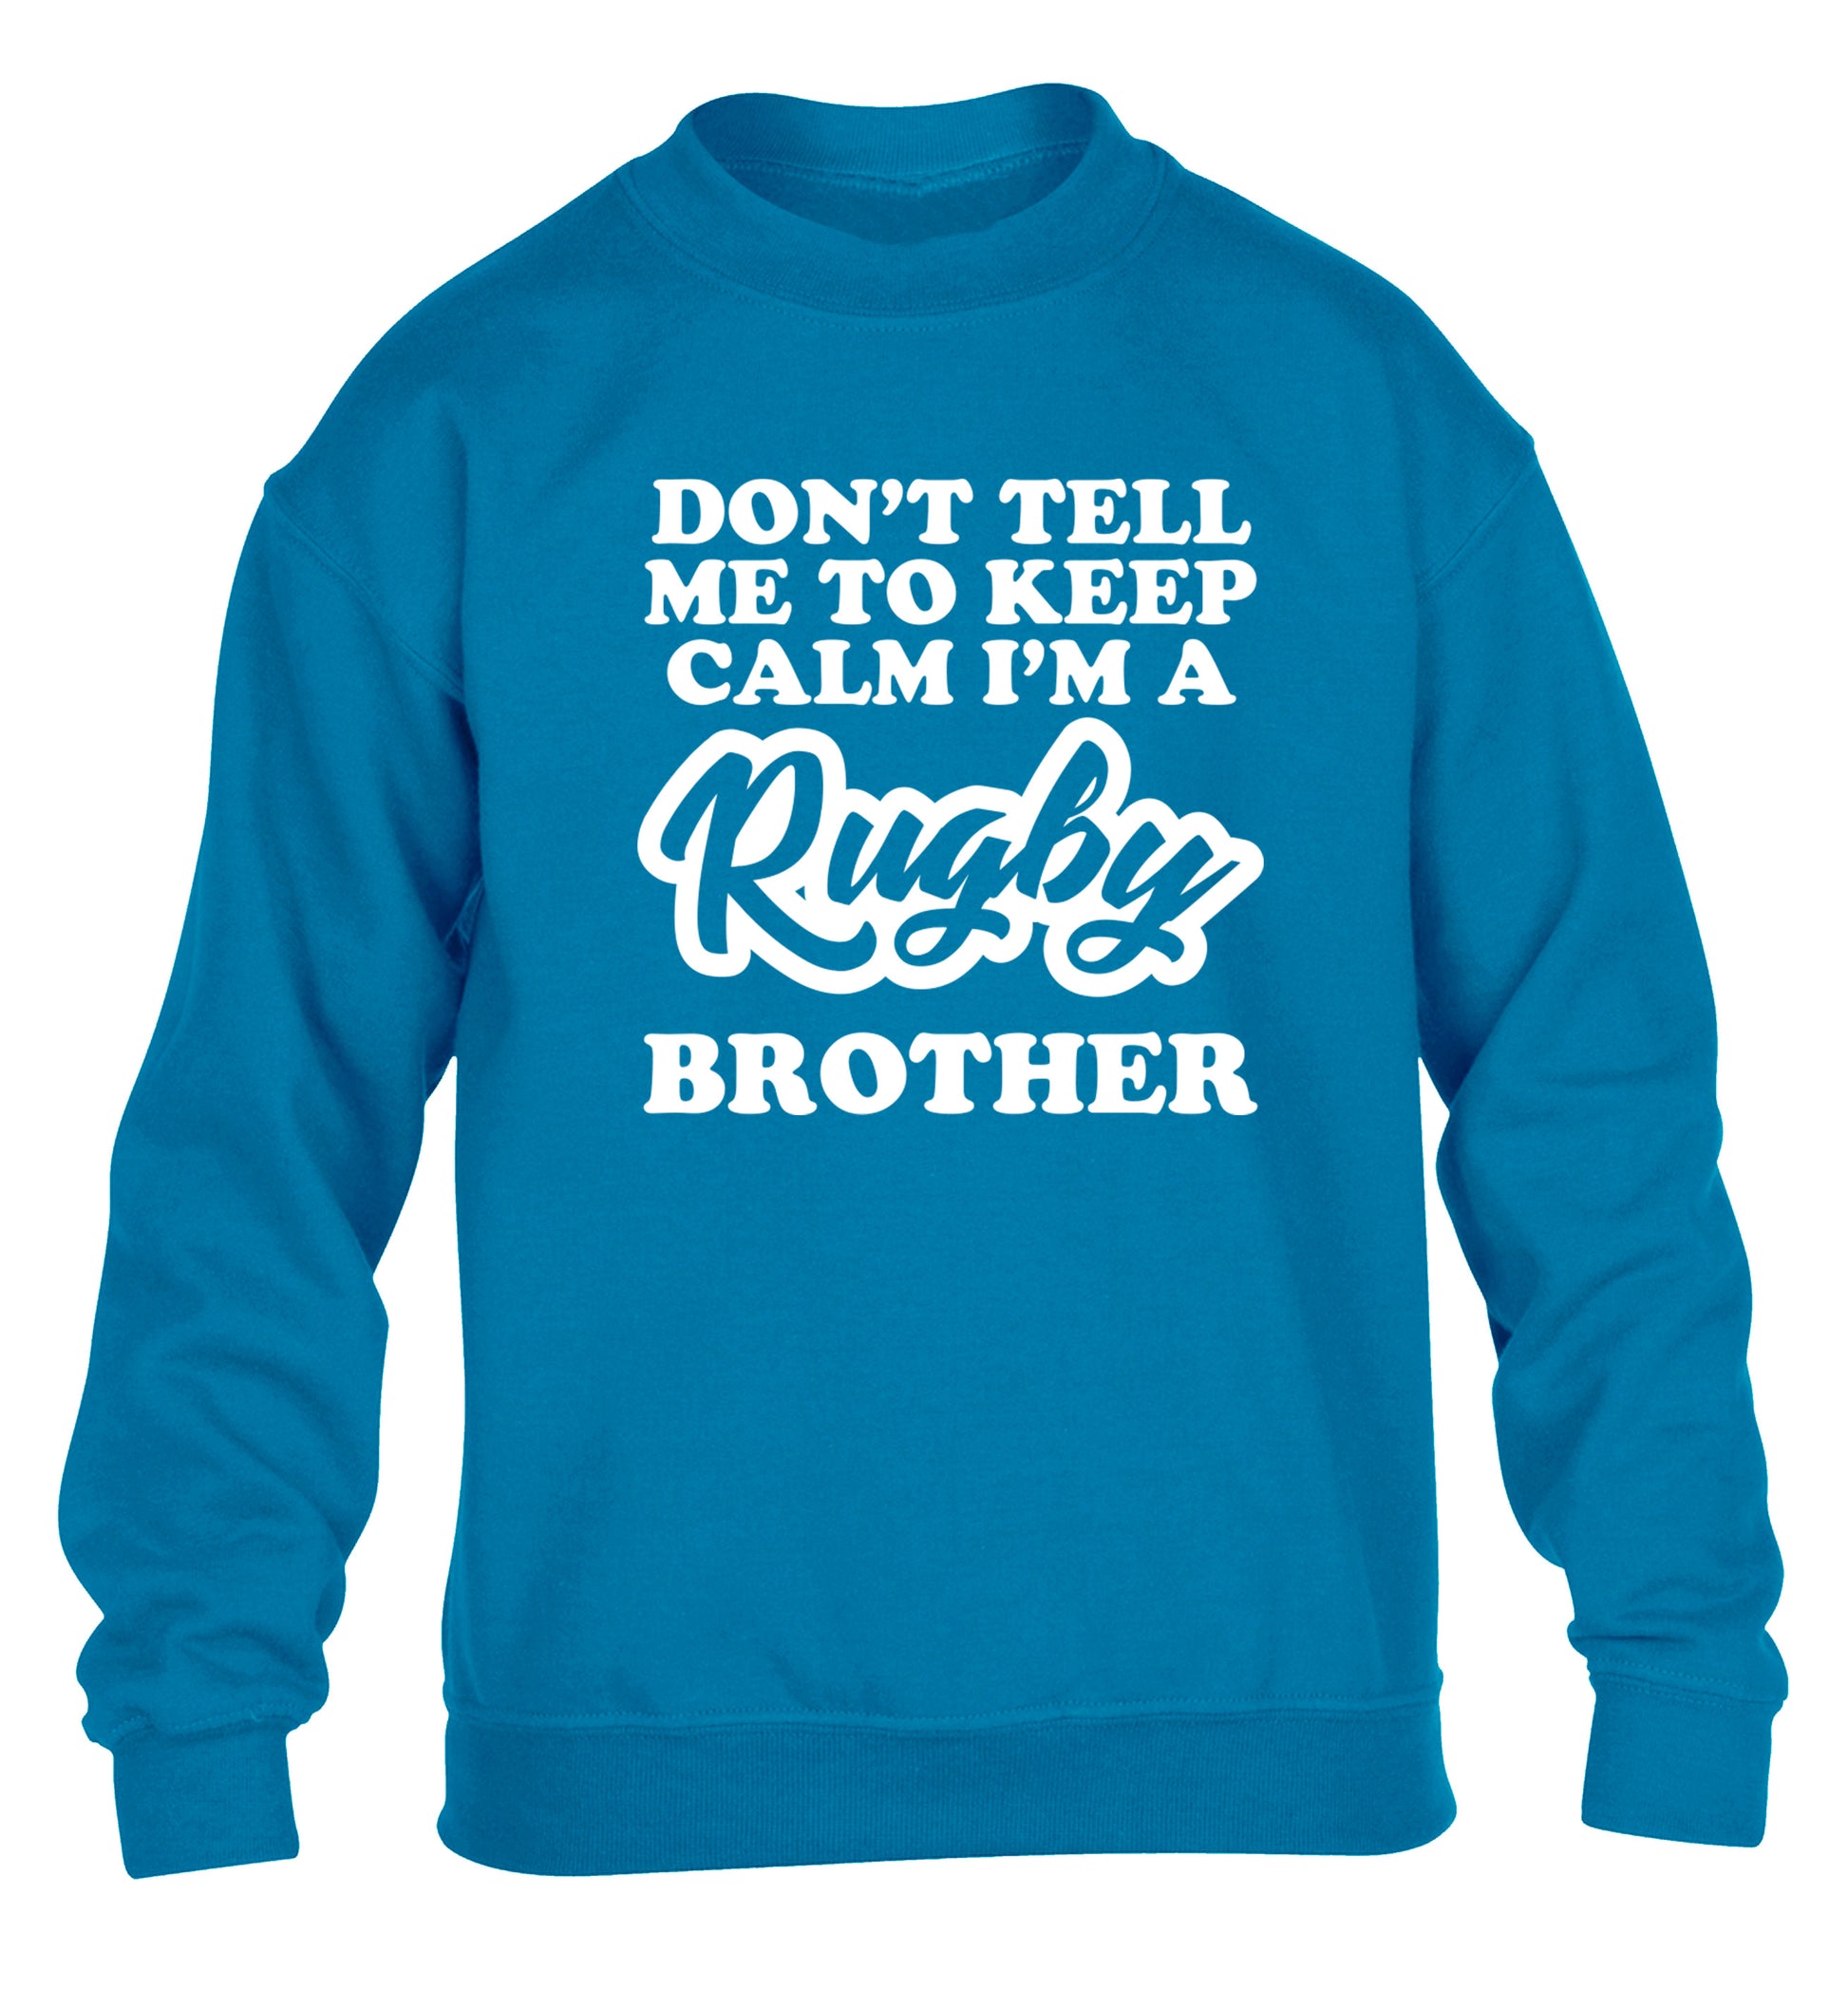 Don't tell me keep calm I'm a rugby brother children's blue sweater 12-13 Years